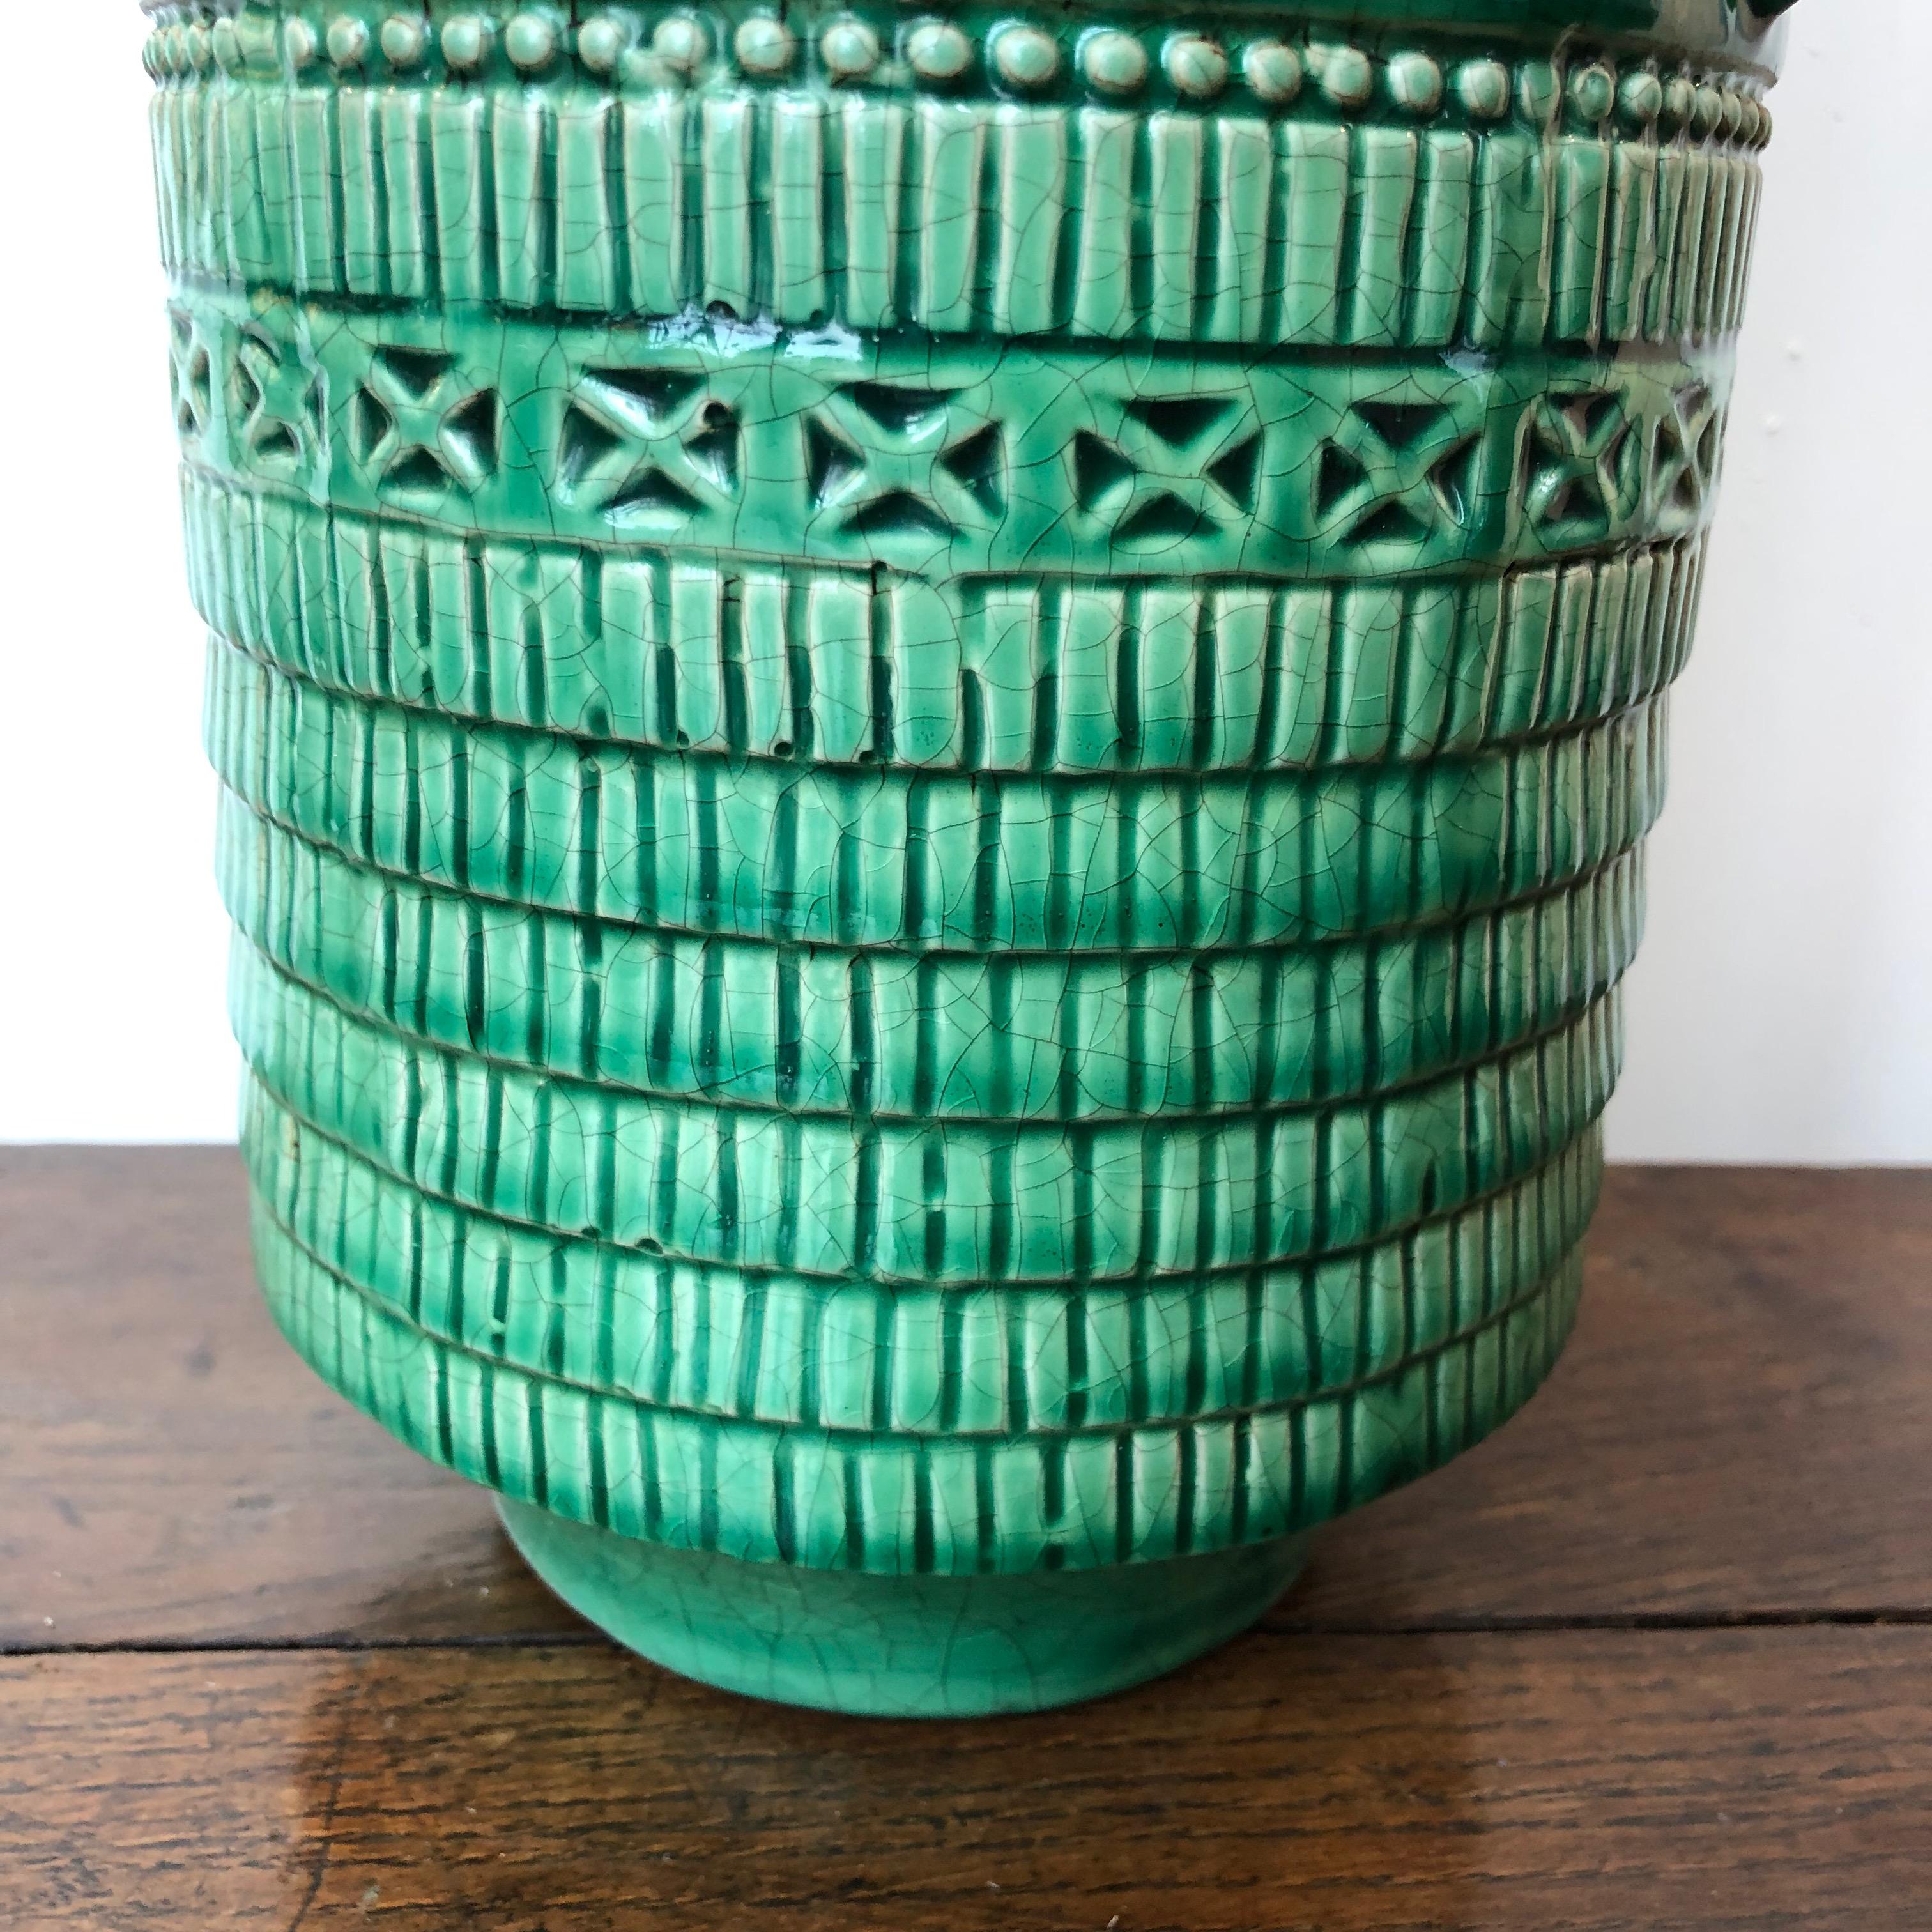 19th century tall kelly green vase with a crackle finish glaze.